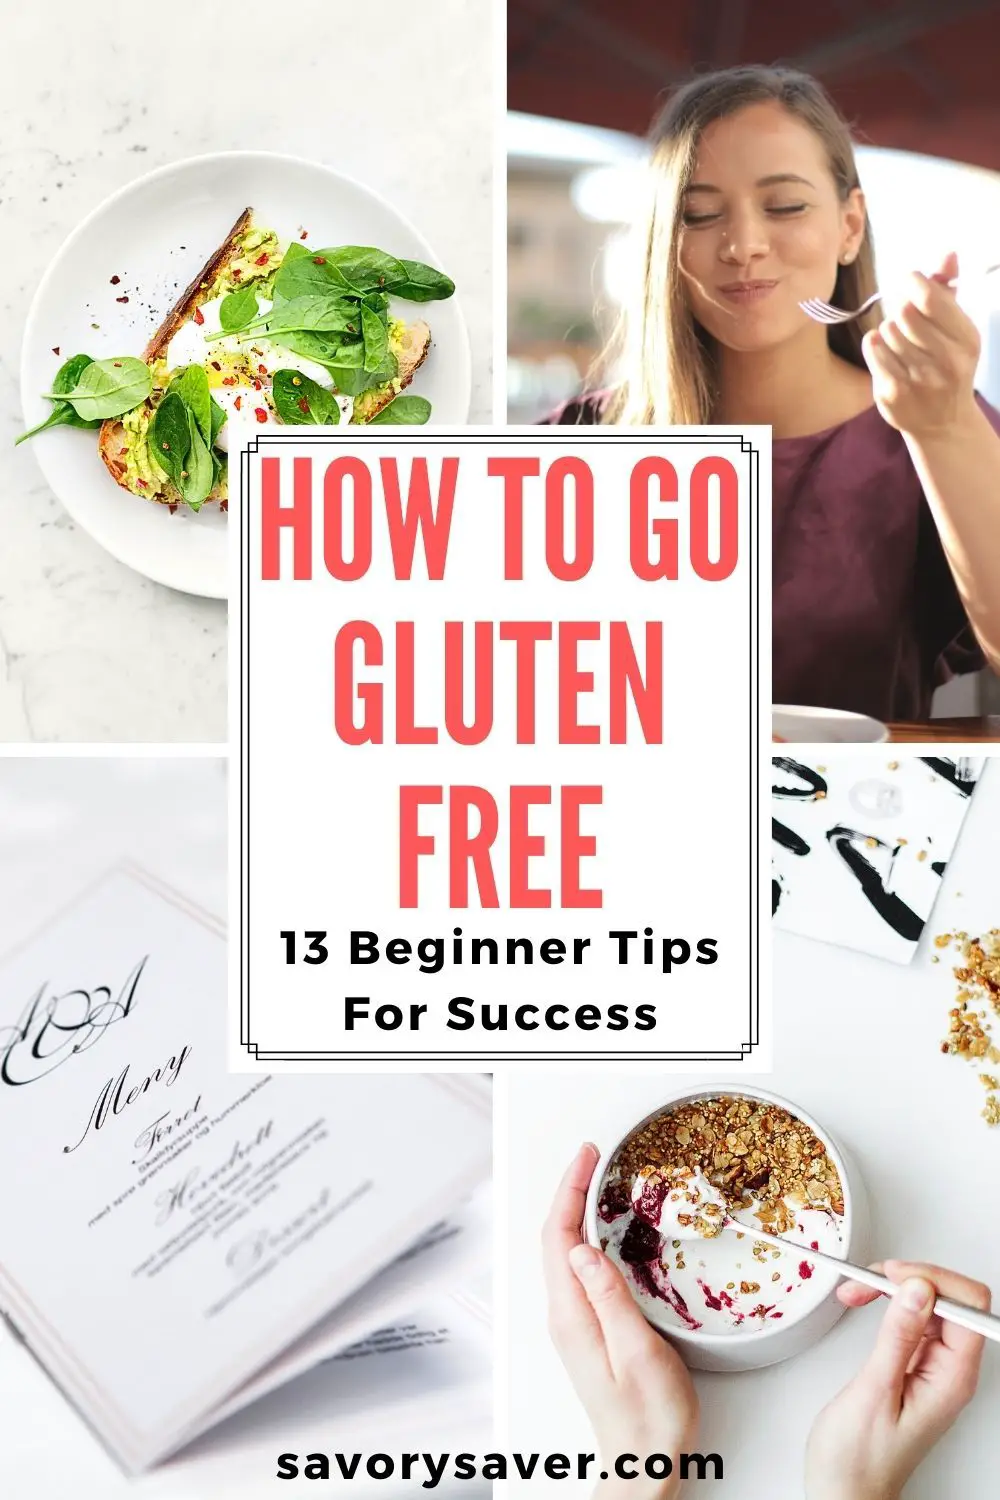 How To Go Gluten Free: 13 Simple Tips for Beginners